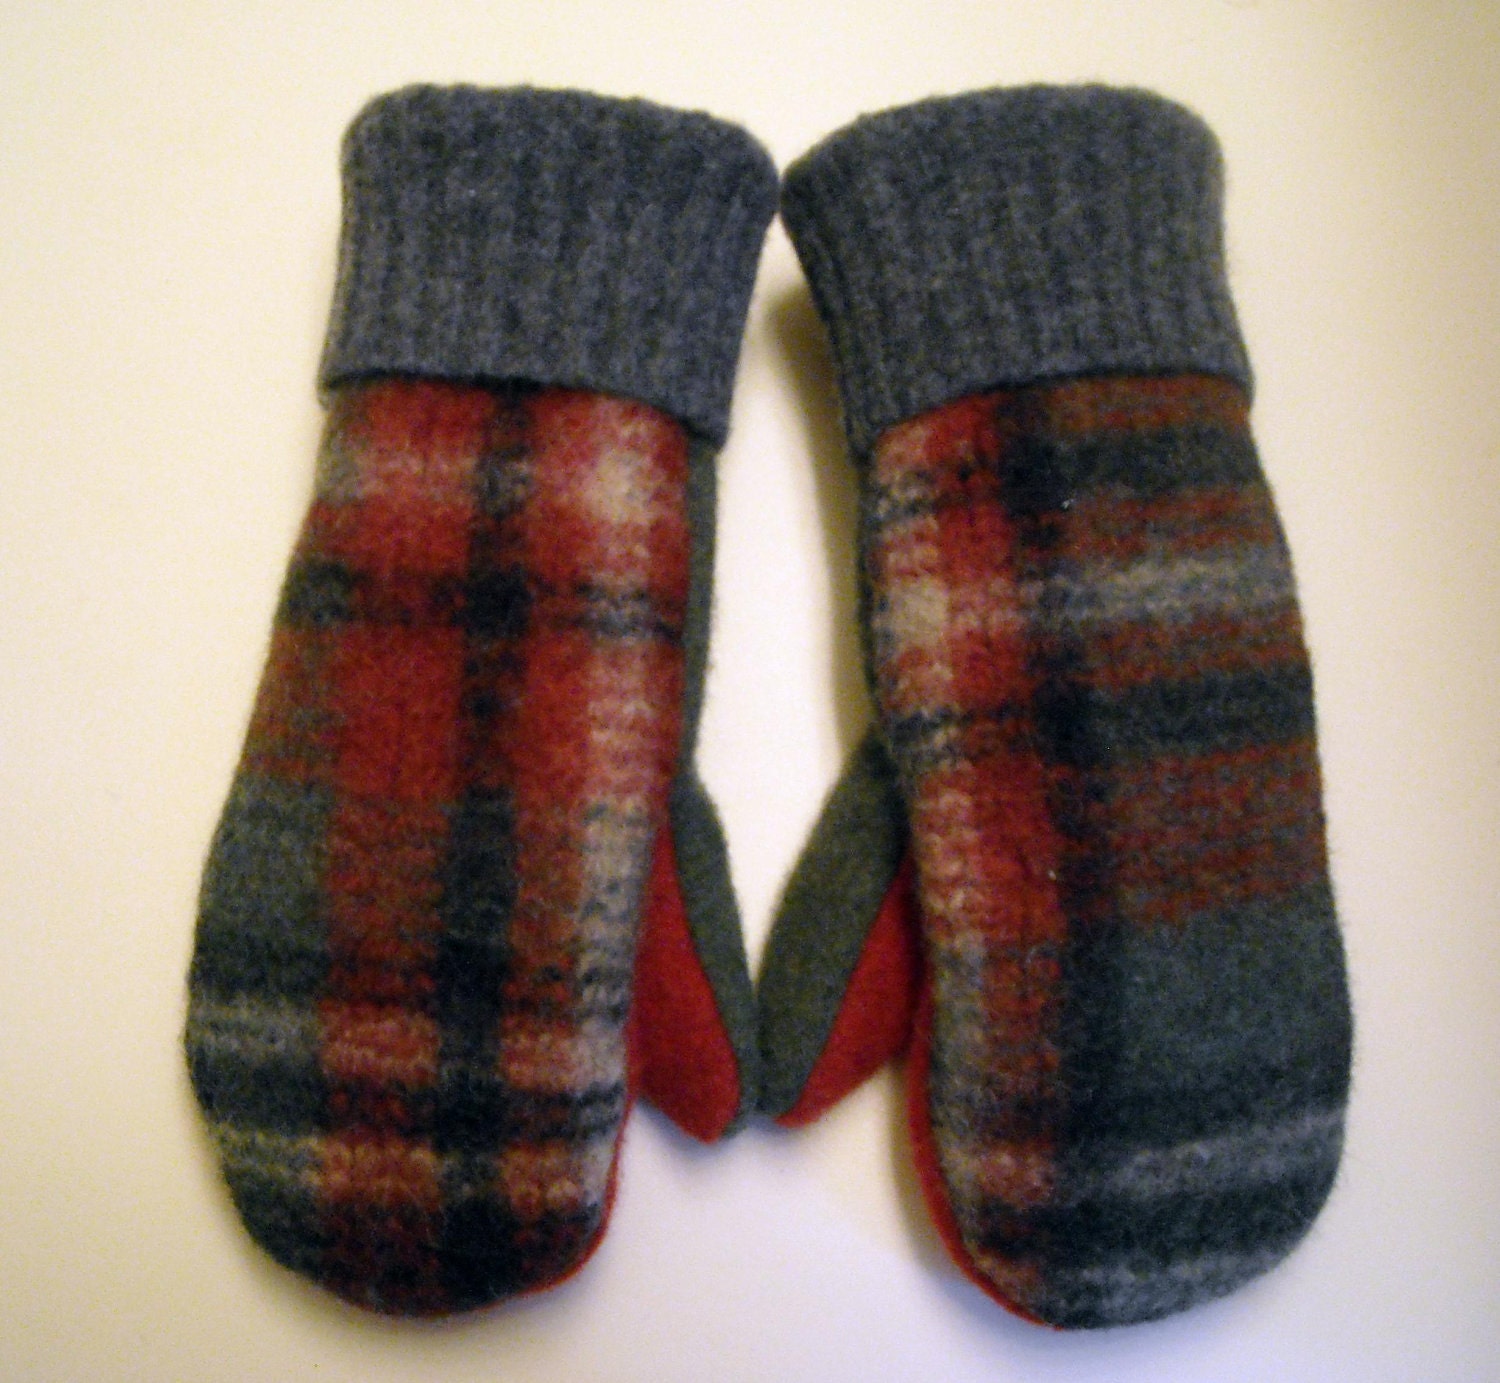 Plaid Wool Mittens lined with soft red and gray cashmere